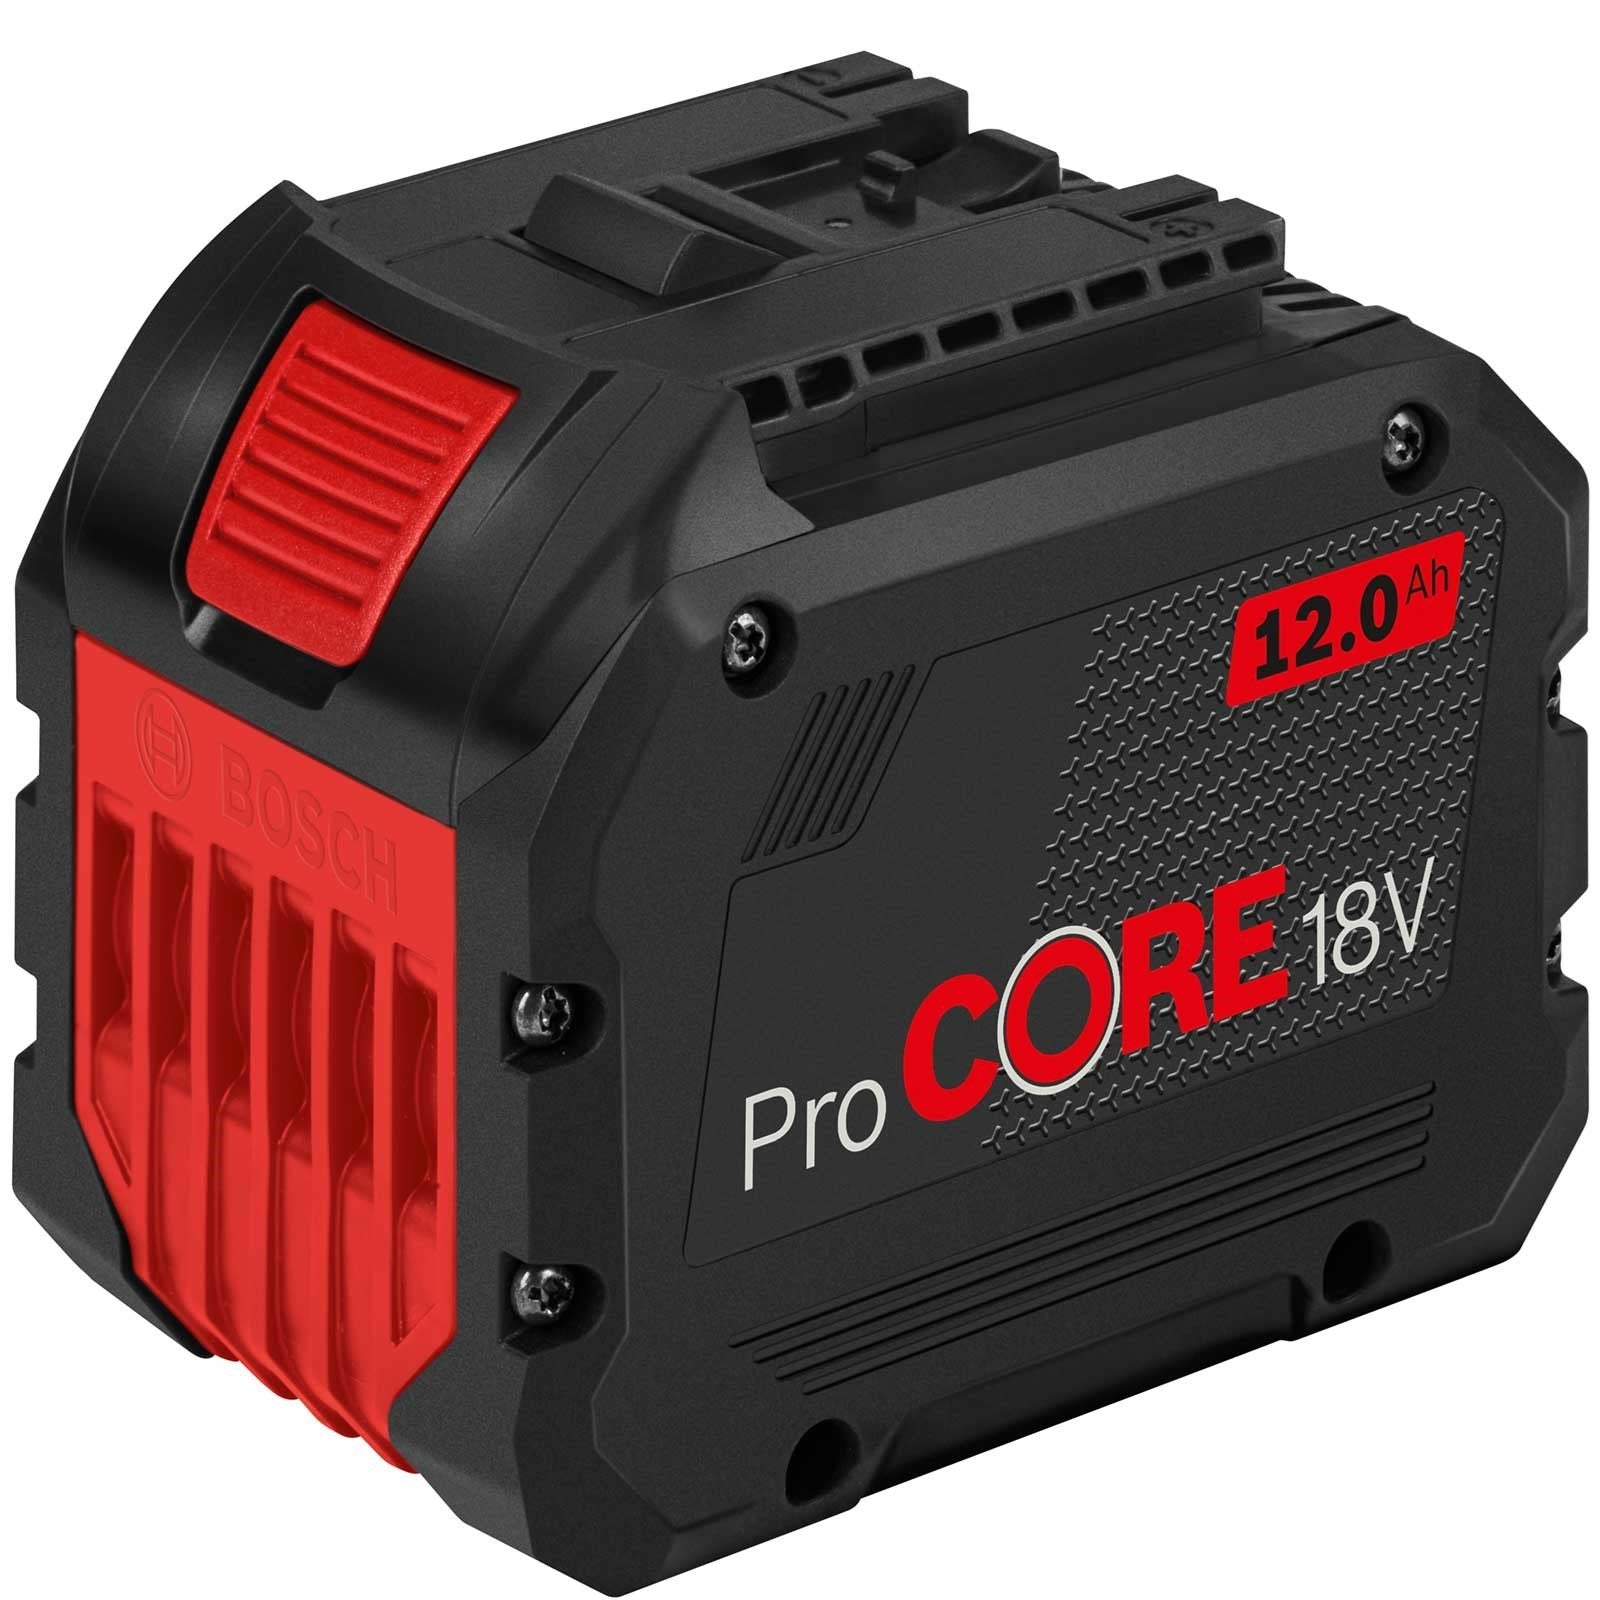 Bosch Professional Battery Pack ProCORE 18V 12.0Ah 1600A0193R Power Tool Services